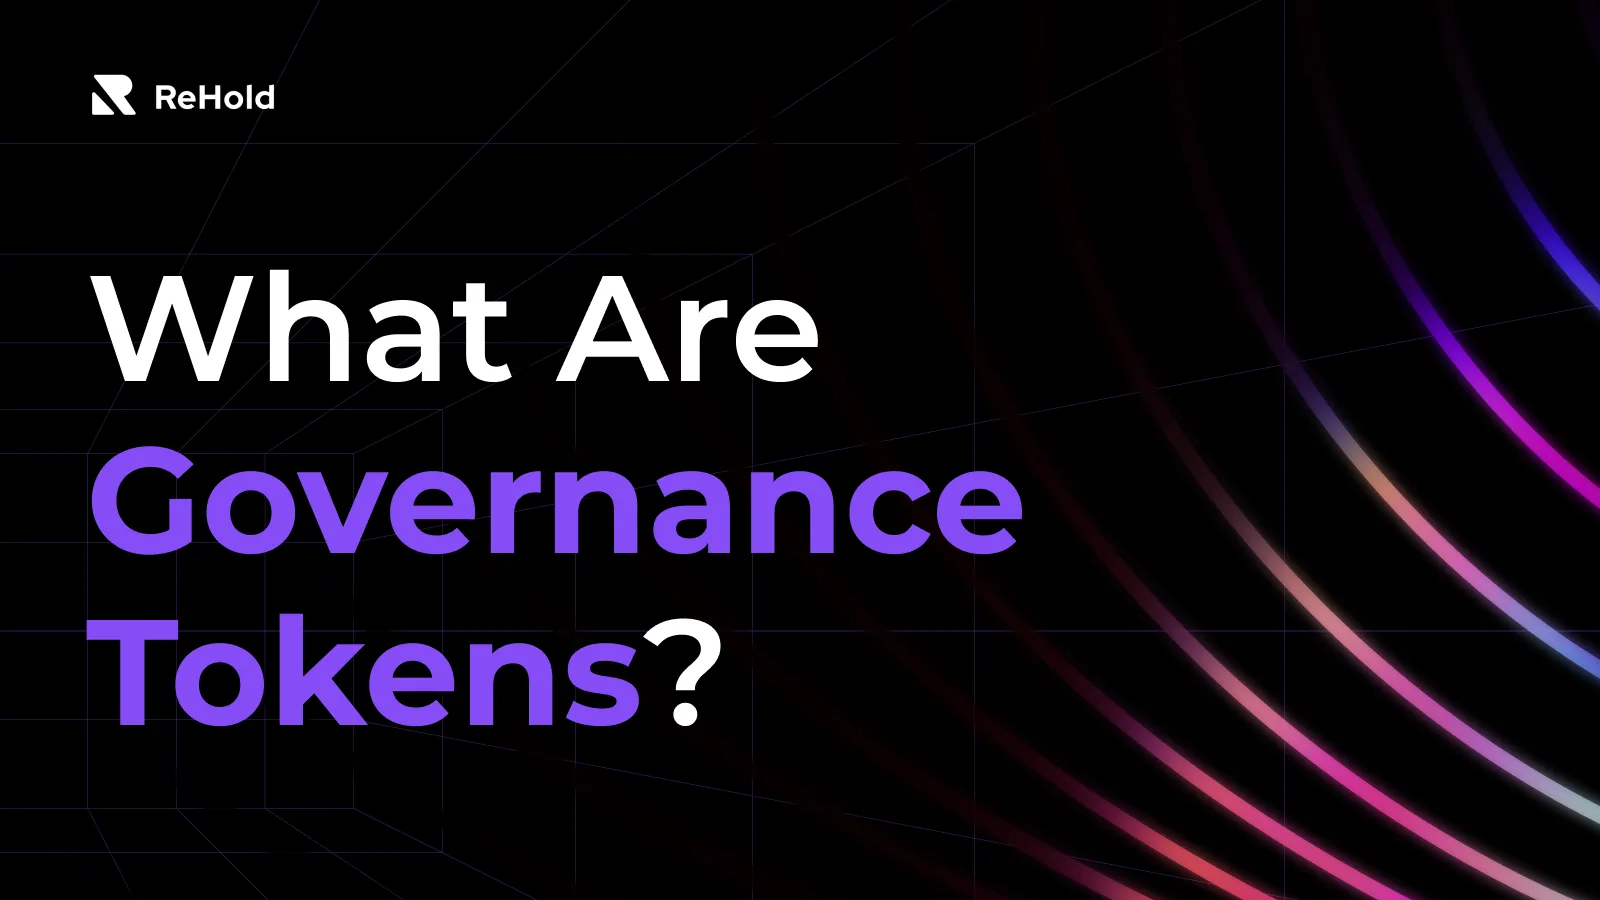 What Are Governance Tokens?